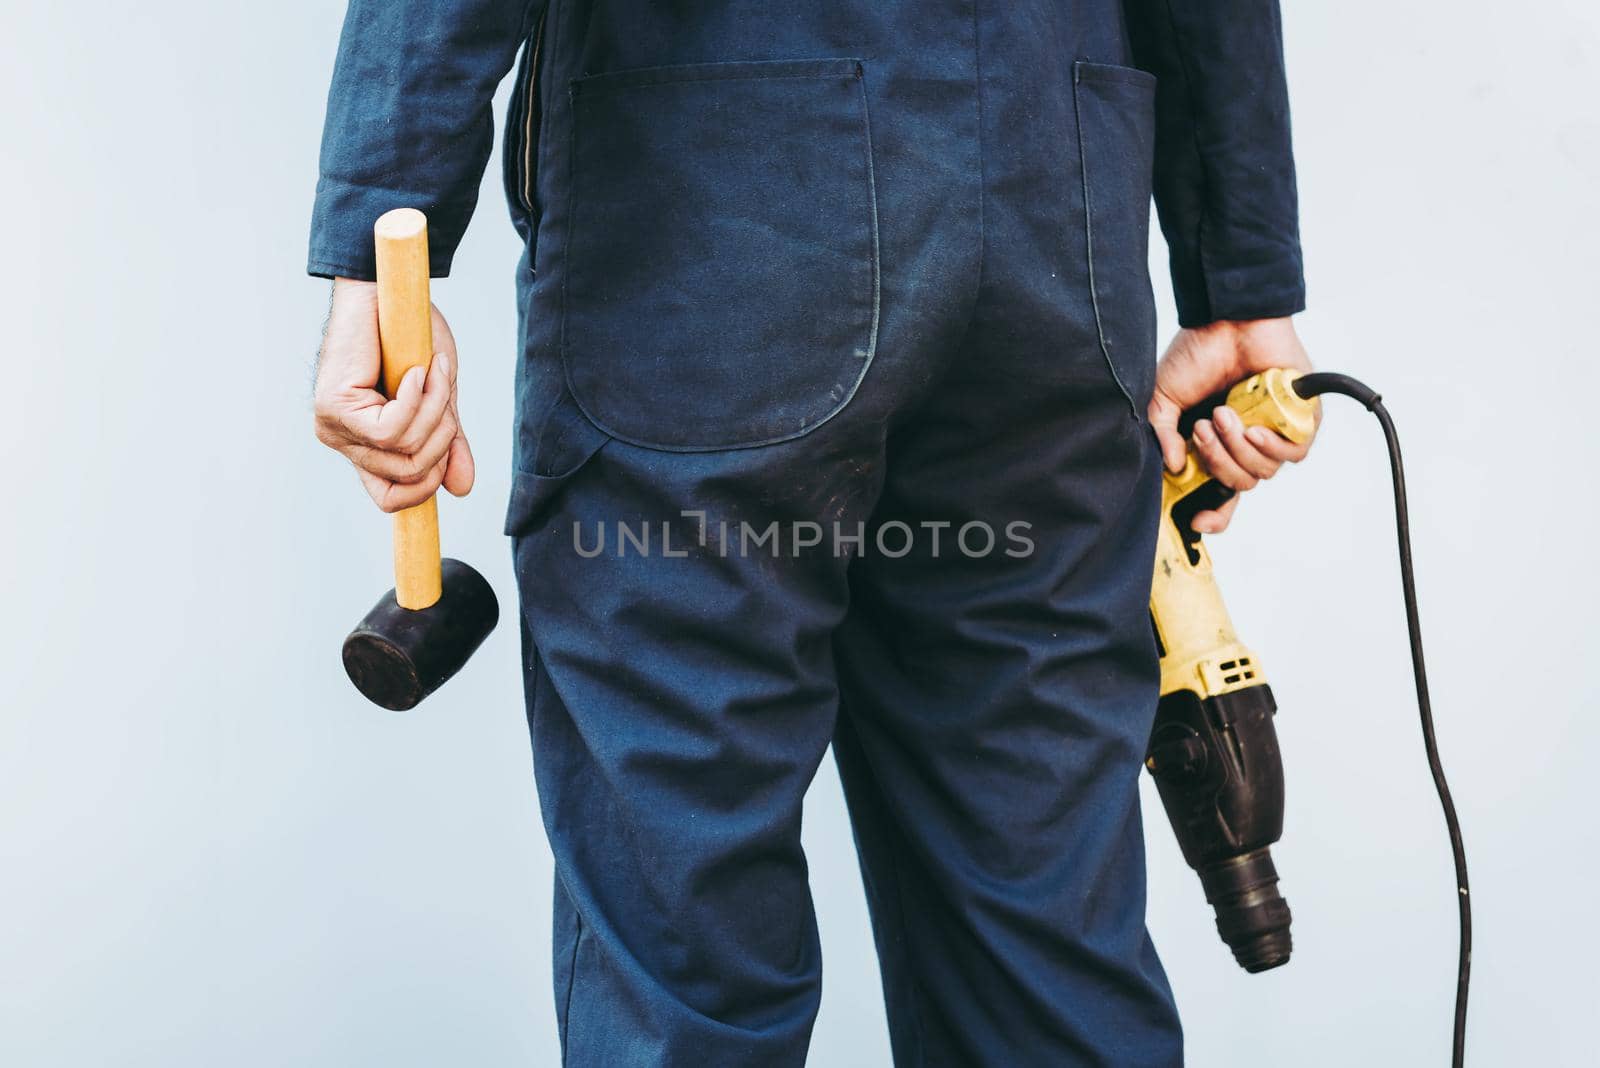 Construction Worker Holding Constructing Equipment Tools on Isolated Background. Carpenter Man Builder Real Estate Jobs Occupation, Business Engineering Industry and Building Development Concept.